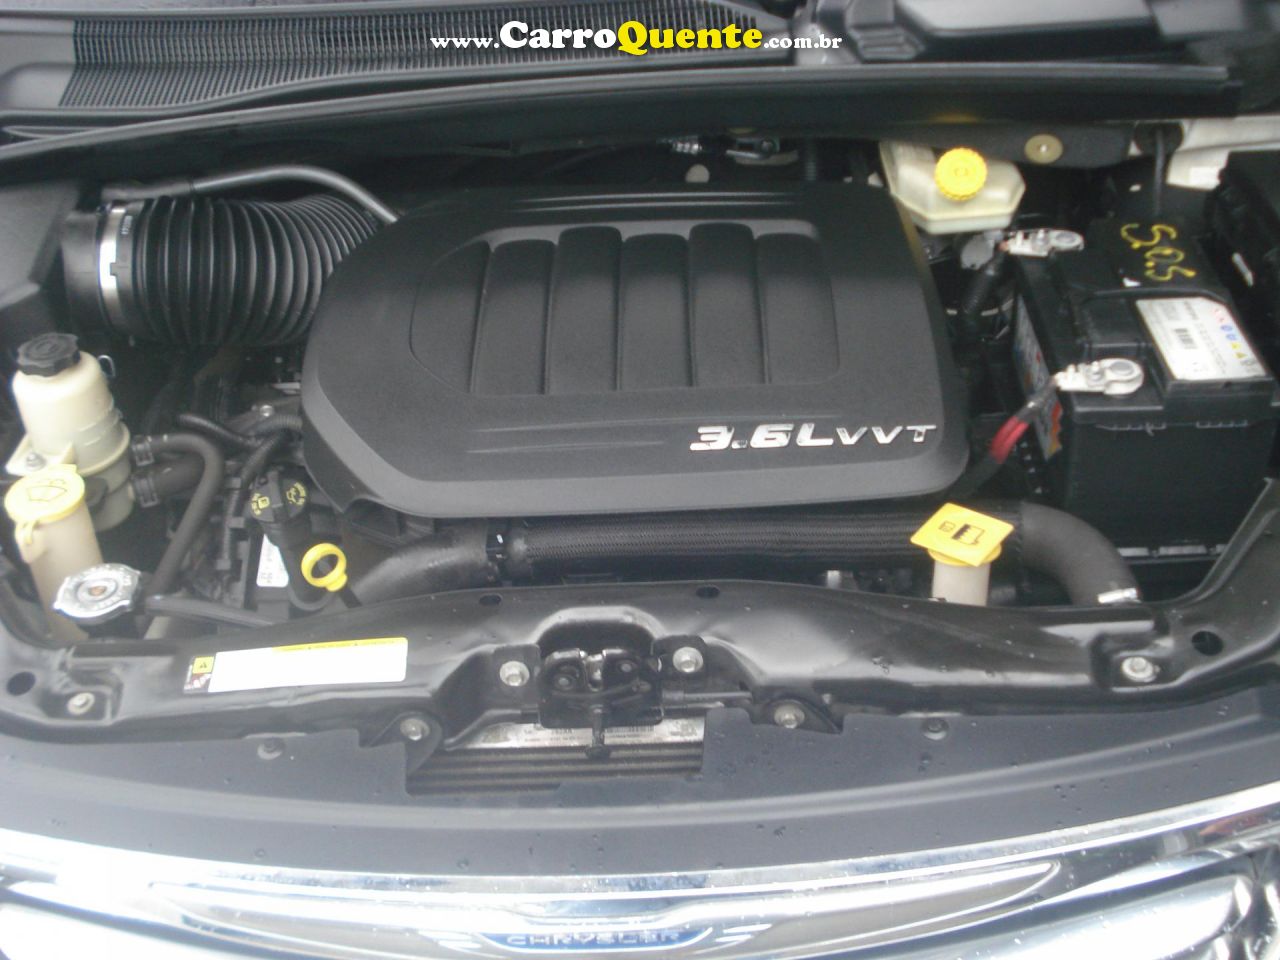 CHRYSLER   TOWN & COUNTRY LIMITED 3.8 3.6 V6 AUT.   BRANCO 2012 3.8 GASOLINA - Loja